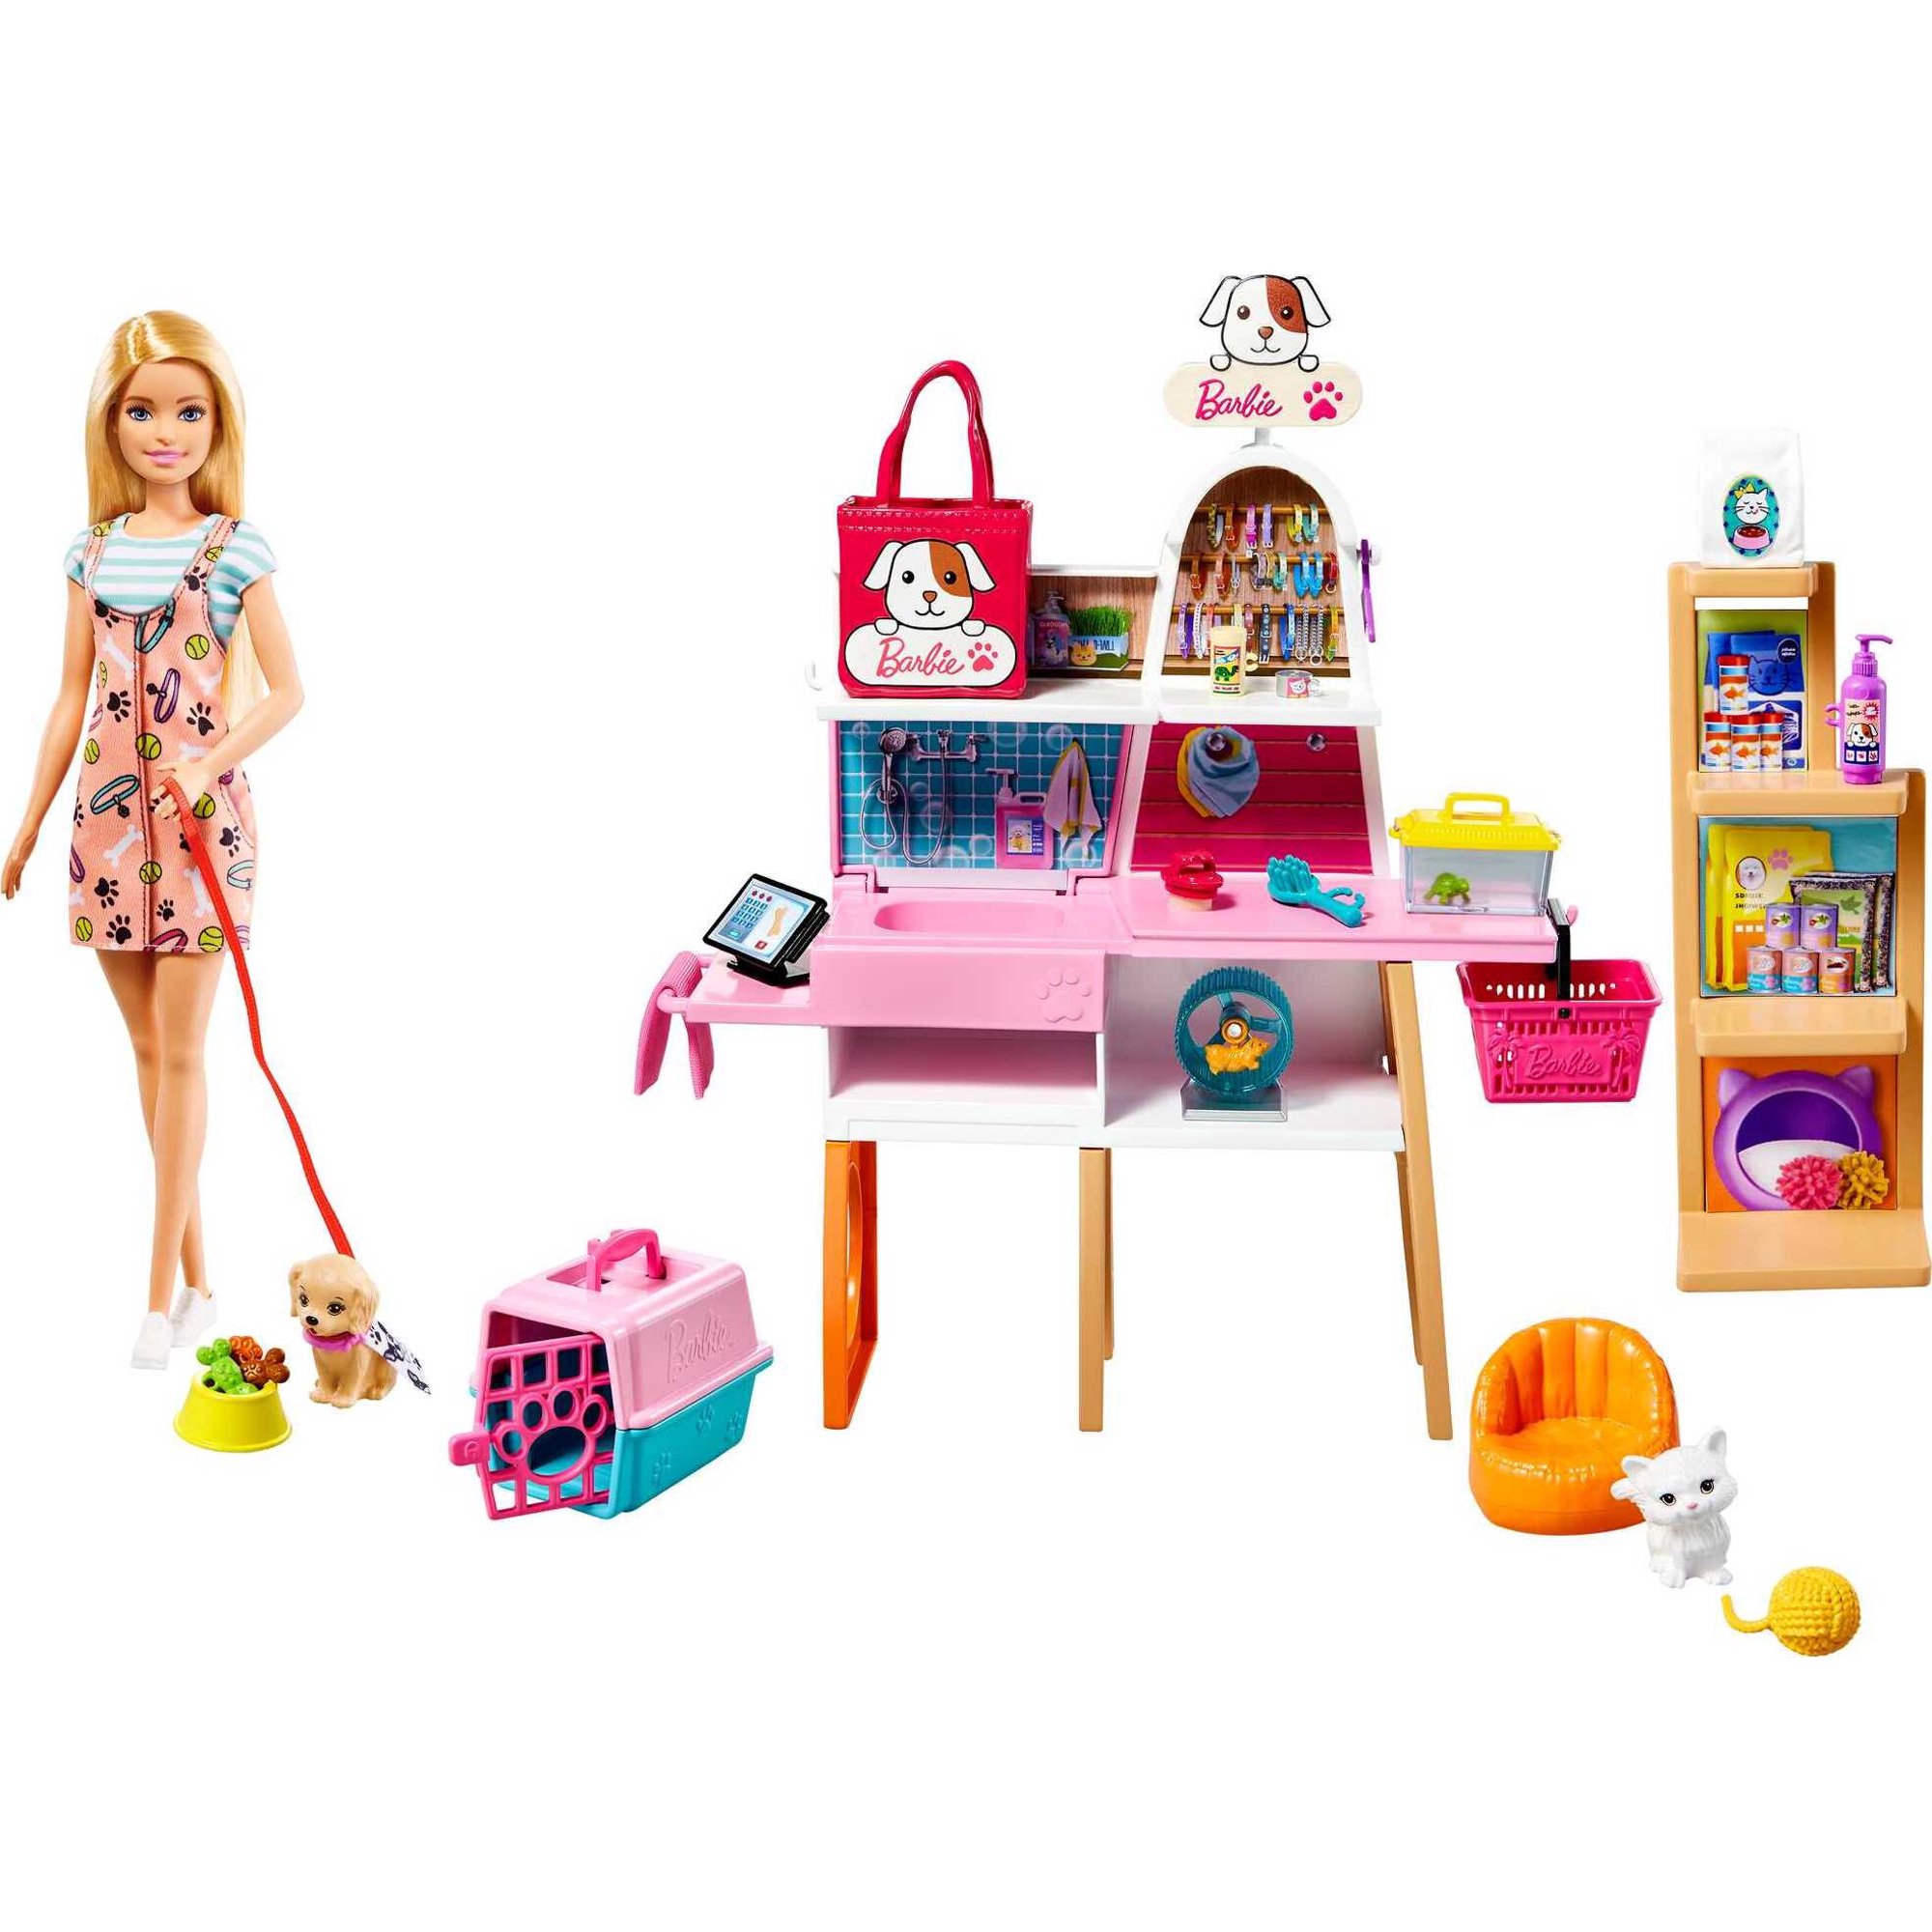 Barbie Doll and Boutique Playset with 4 Pets, 20+ Themed Accessories and Color Change - Walmart.com